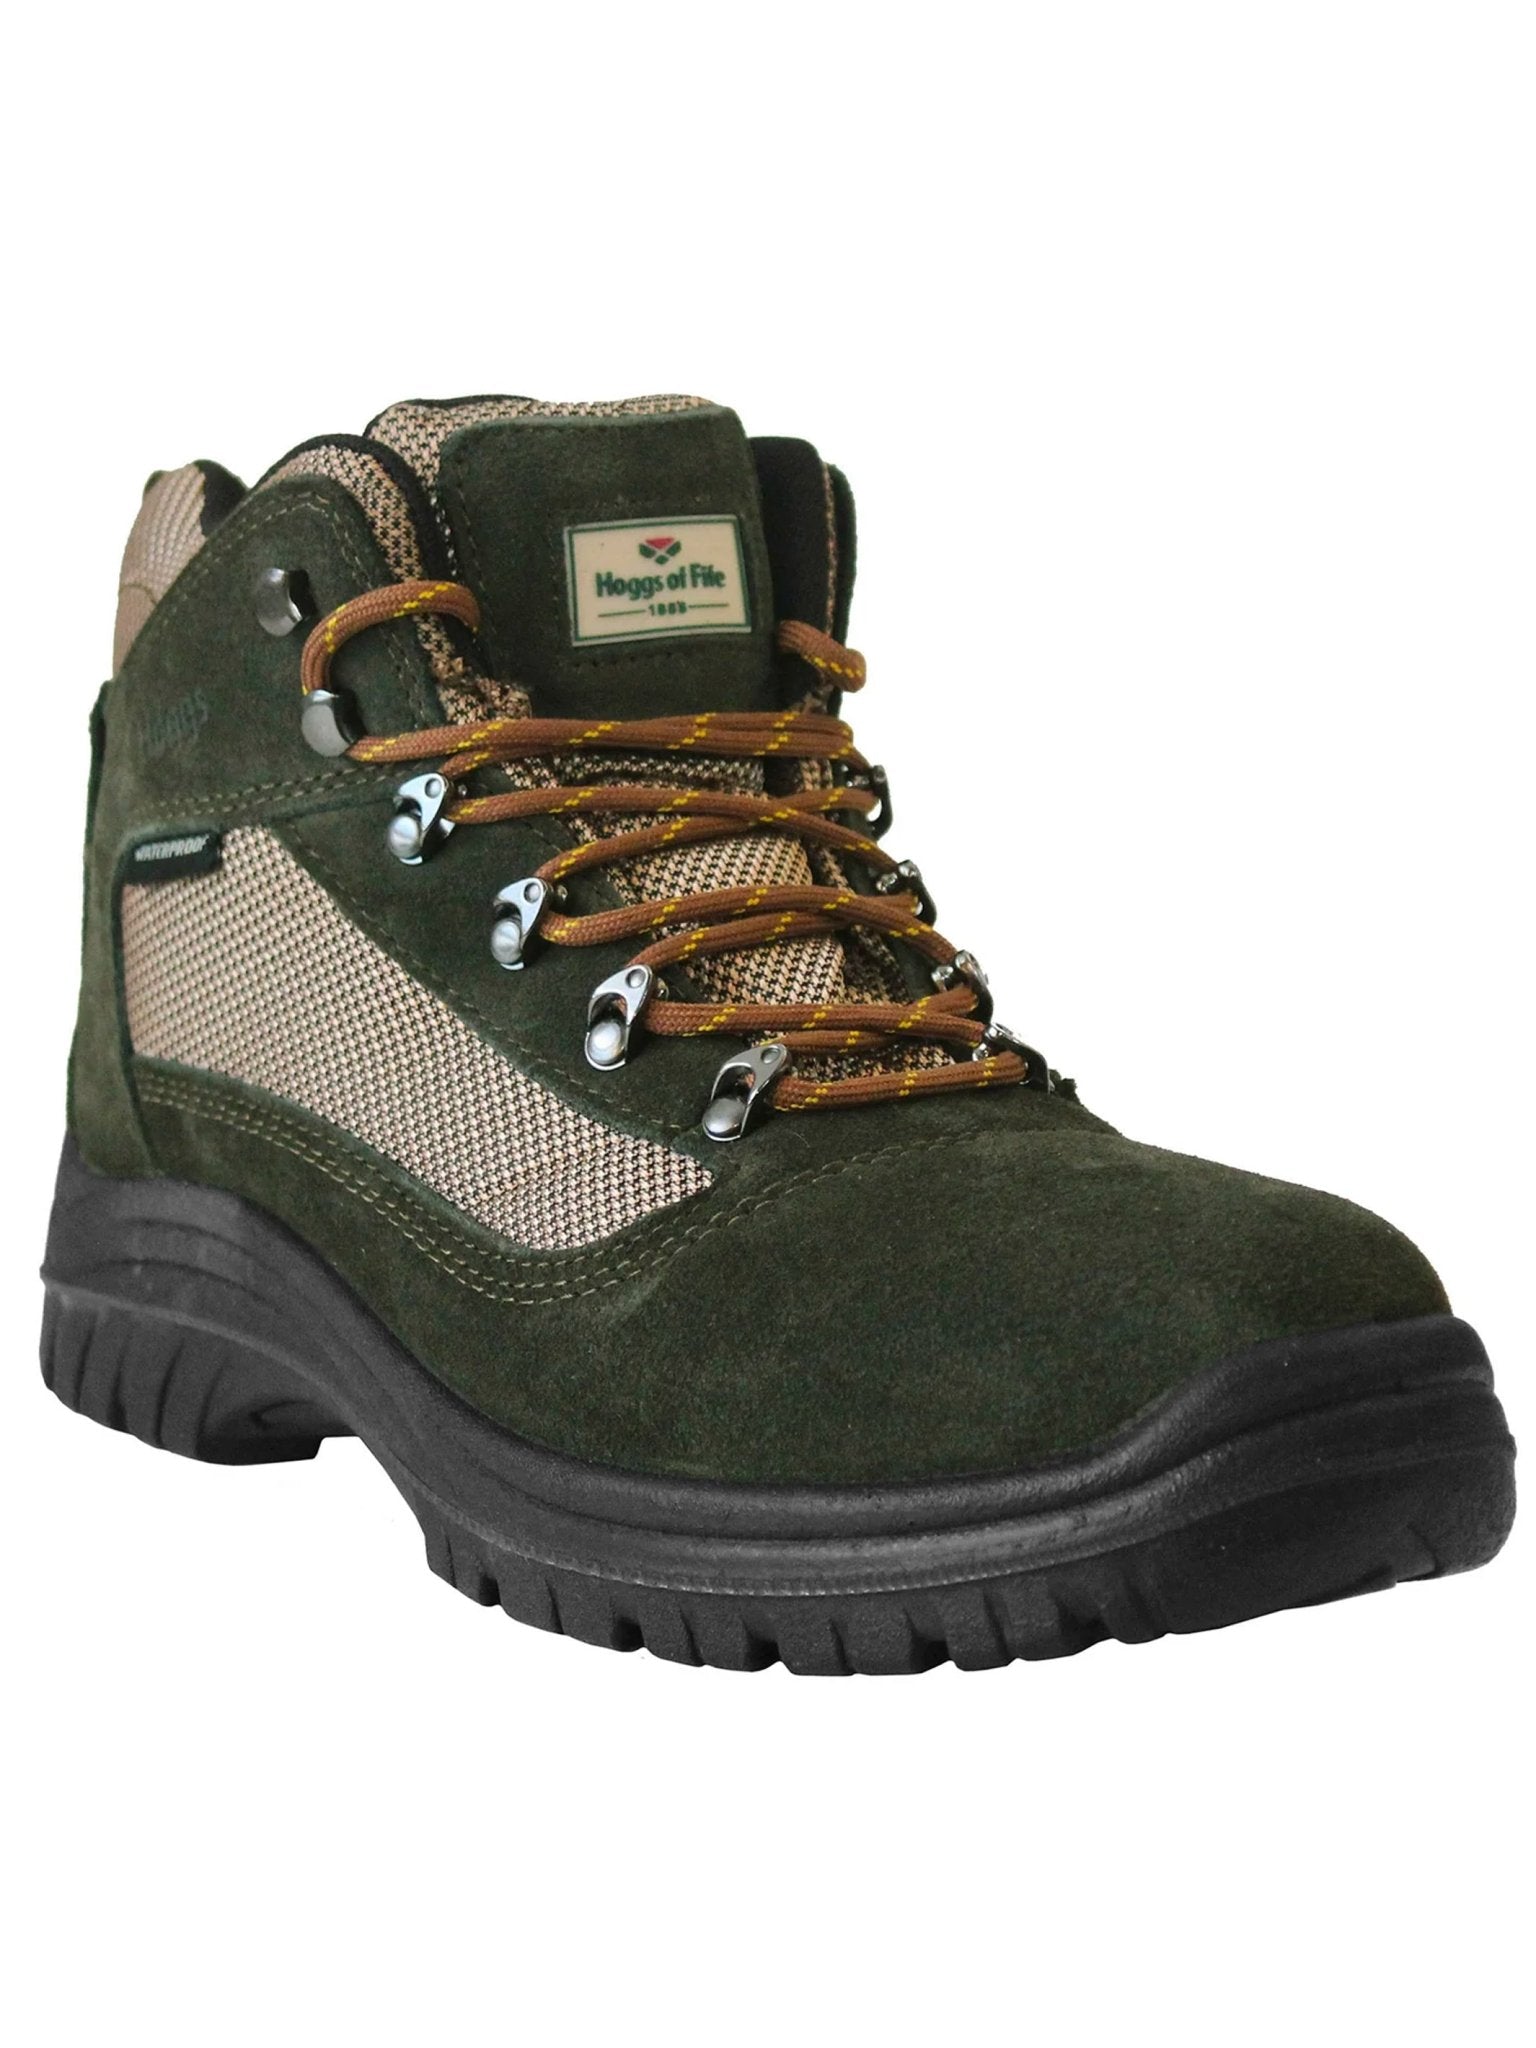 Hoggs of Fife Hoggs of Fife - Rambler Waterproof boots, Hiking boot, Lightweight breathable boots Boots